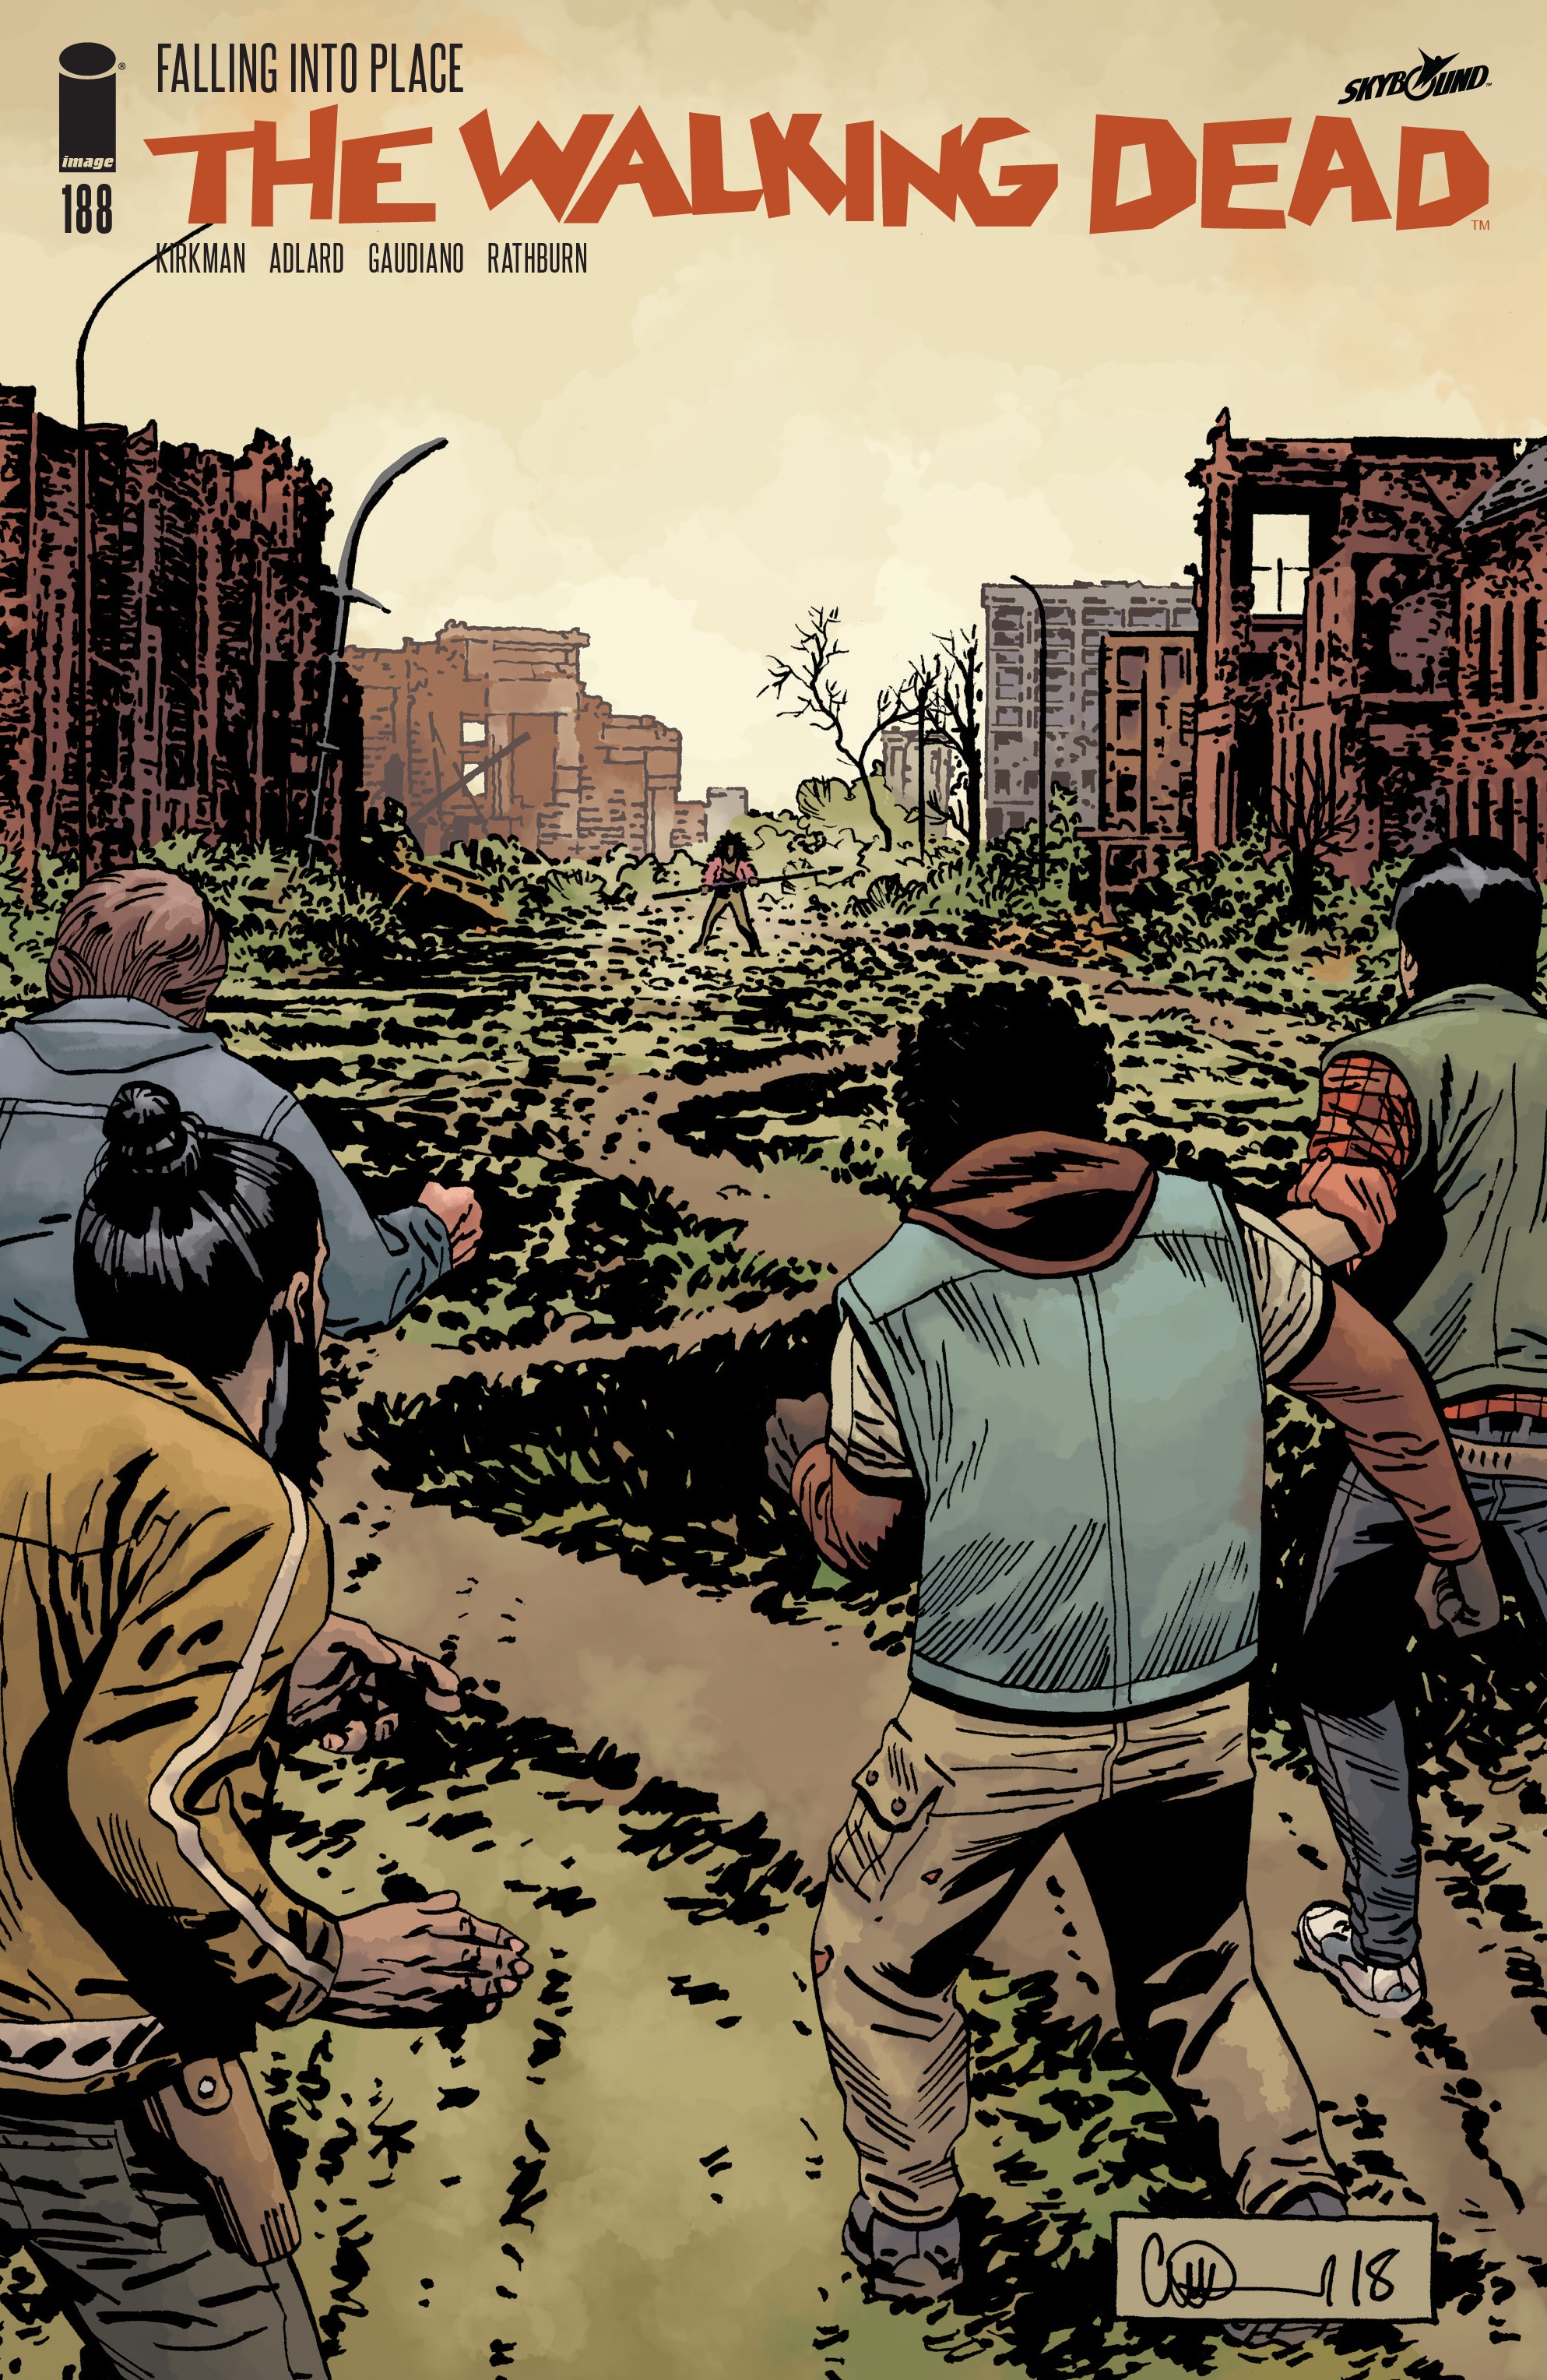 The Walking Dead (2003-): Chapter 188 - Page 1